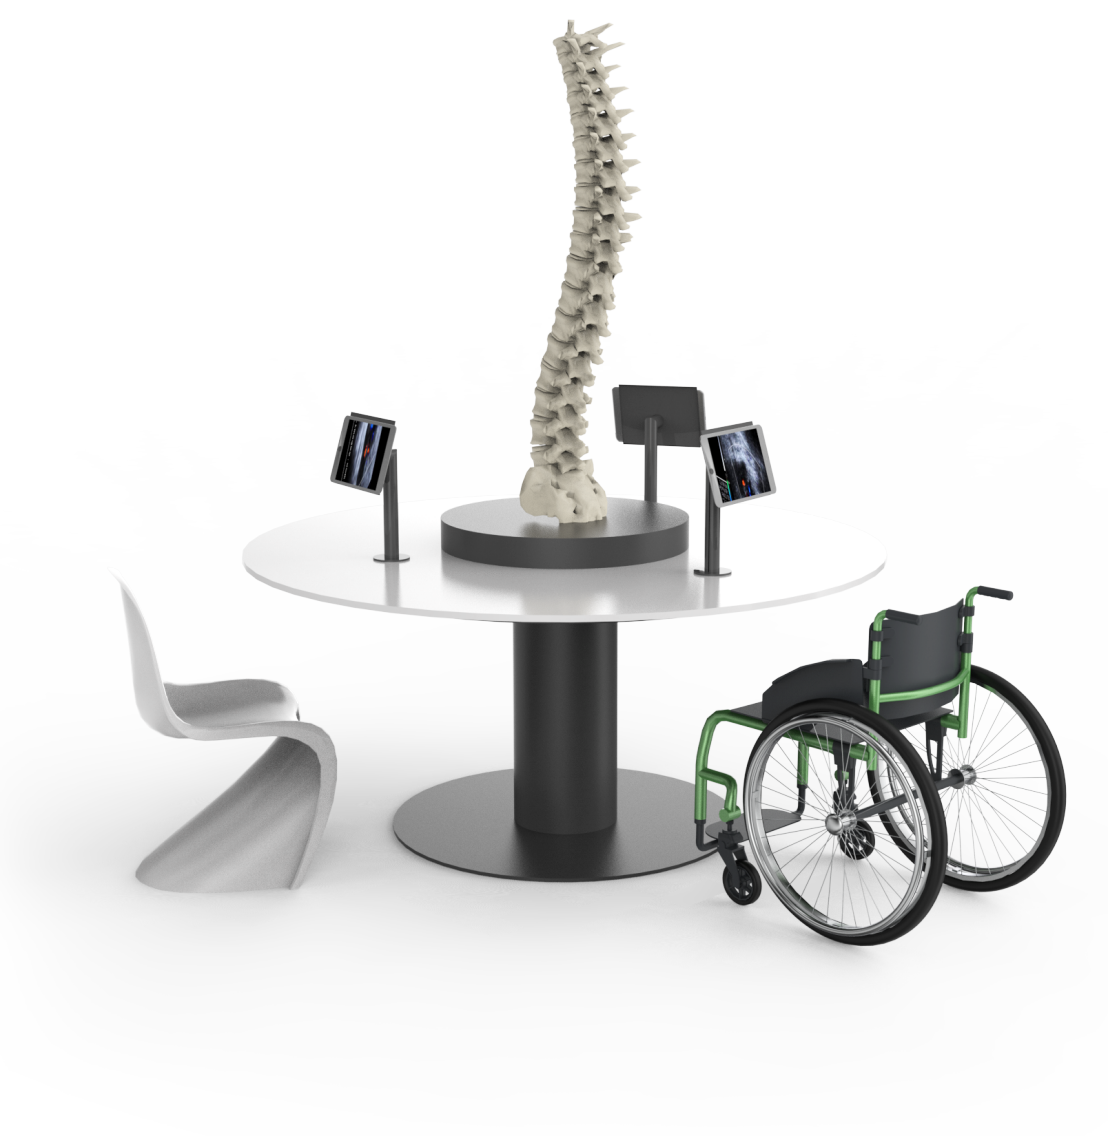 Enlarged view: Table with a spine model on it, a wheelchair at the side and a person looking at the scene